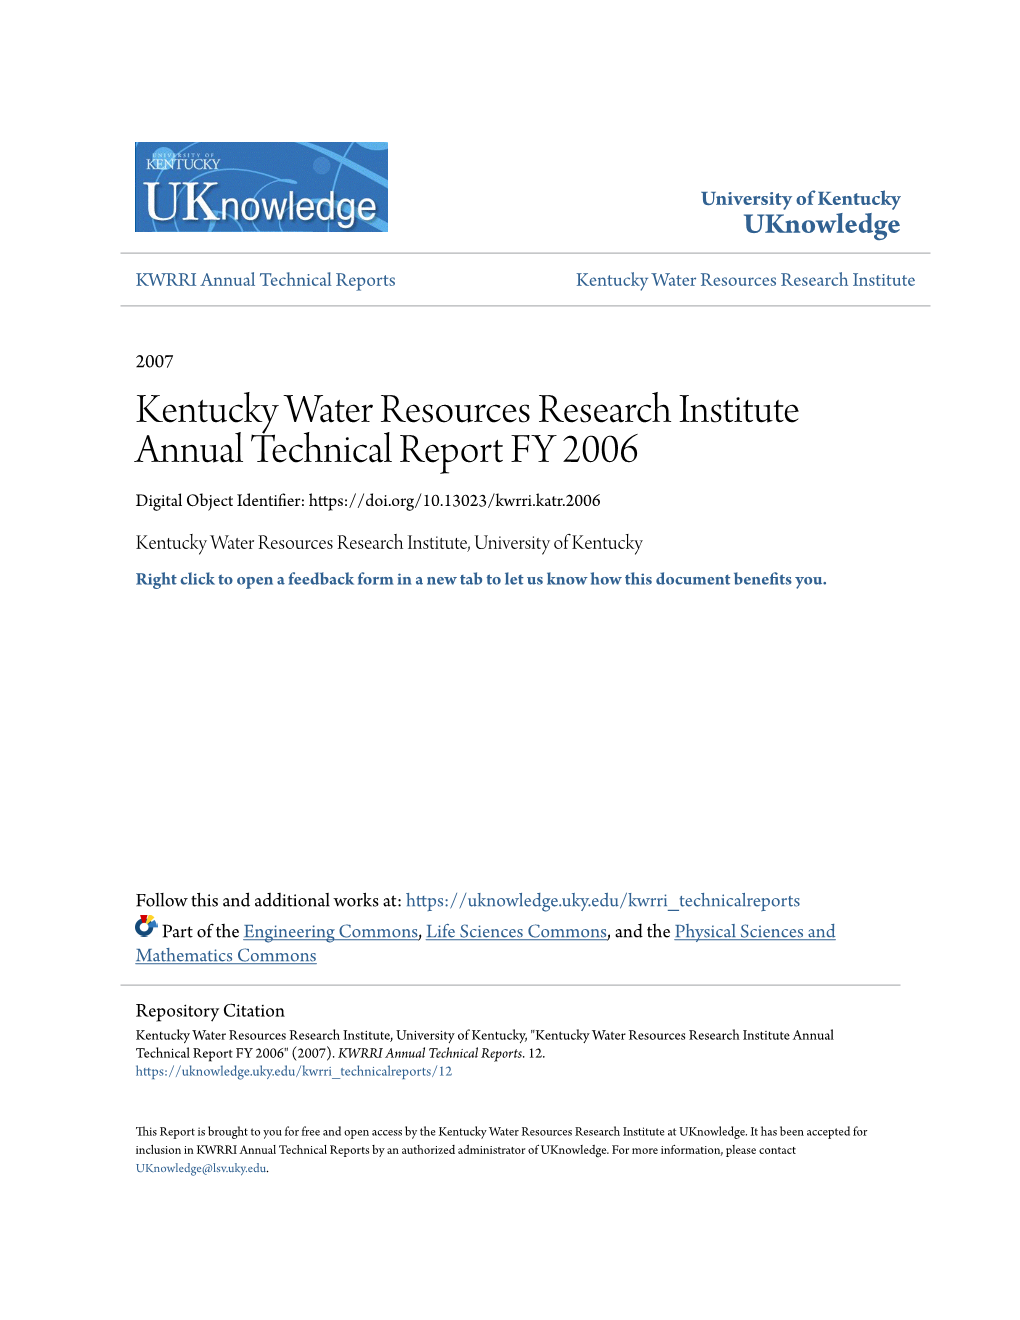 Kentucky Water Resources Research Institute Annual Technical Report FY 2006 Digital Object Identifier